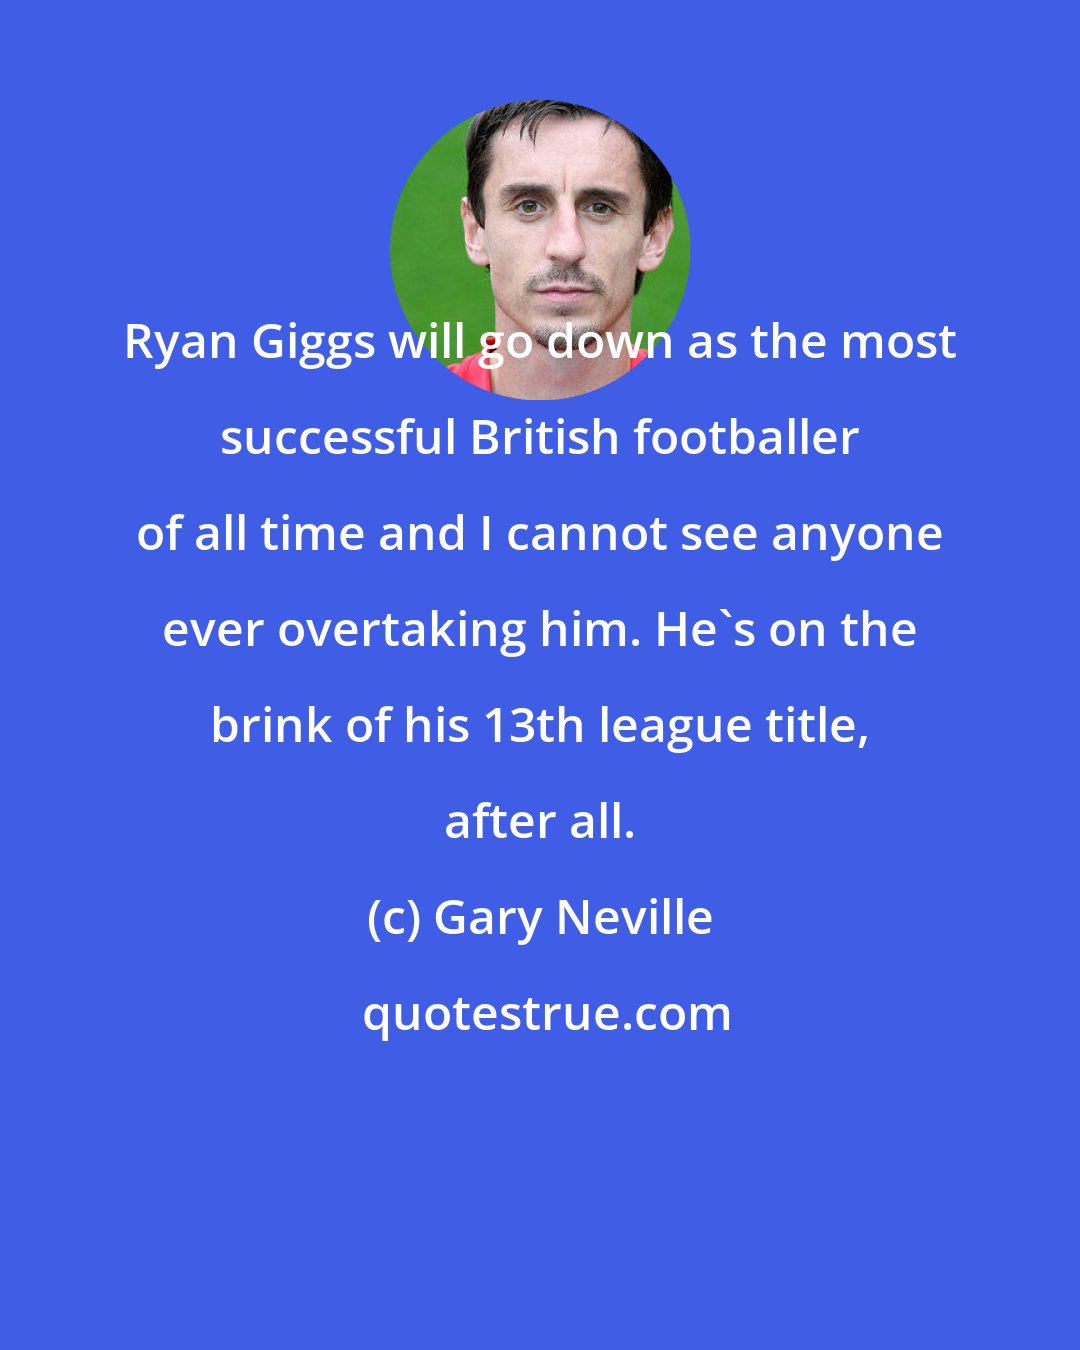 Gary Neville: Ryan Giggs will go down as the most successful British footballer of all time and I cannot see anyone ever overtaking him. He's on the brink of his 13th league title, after all.